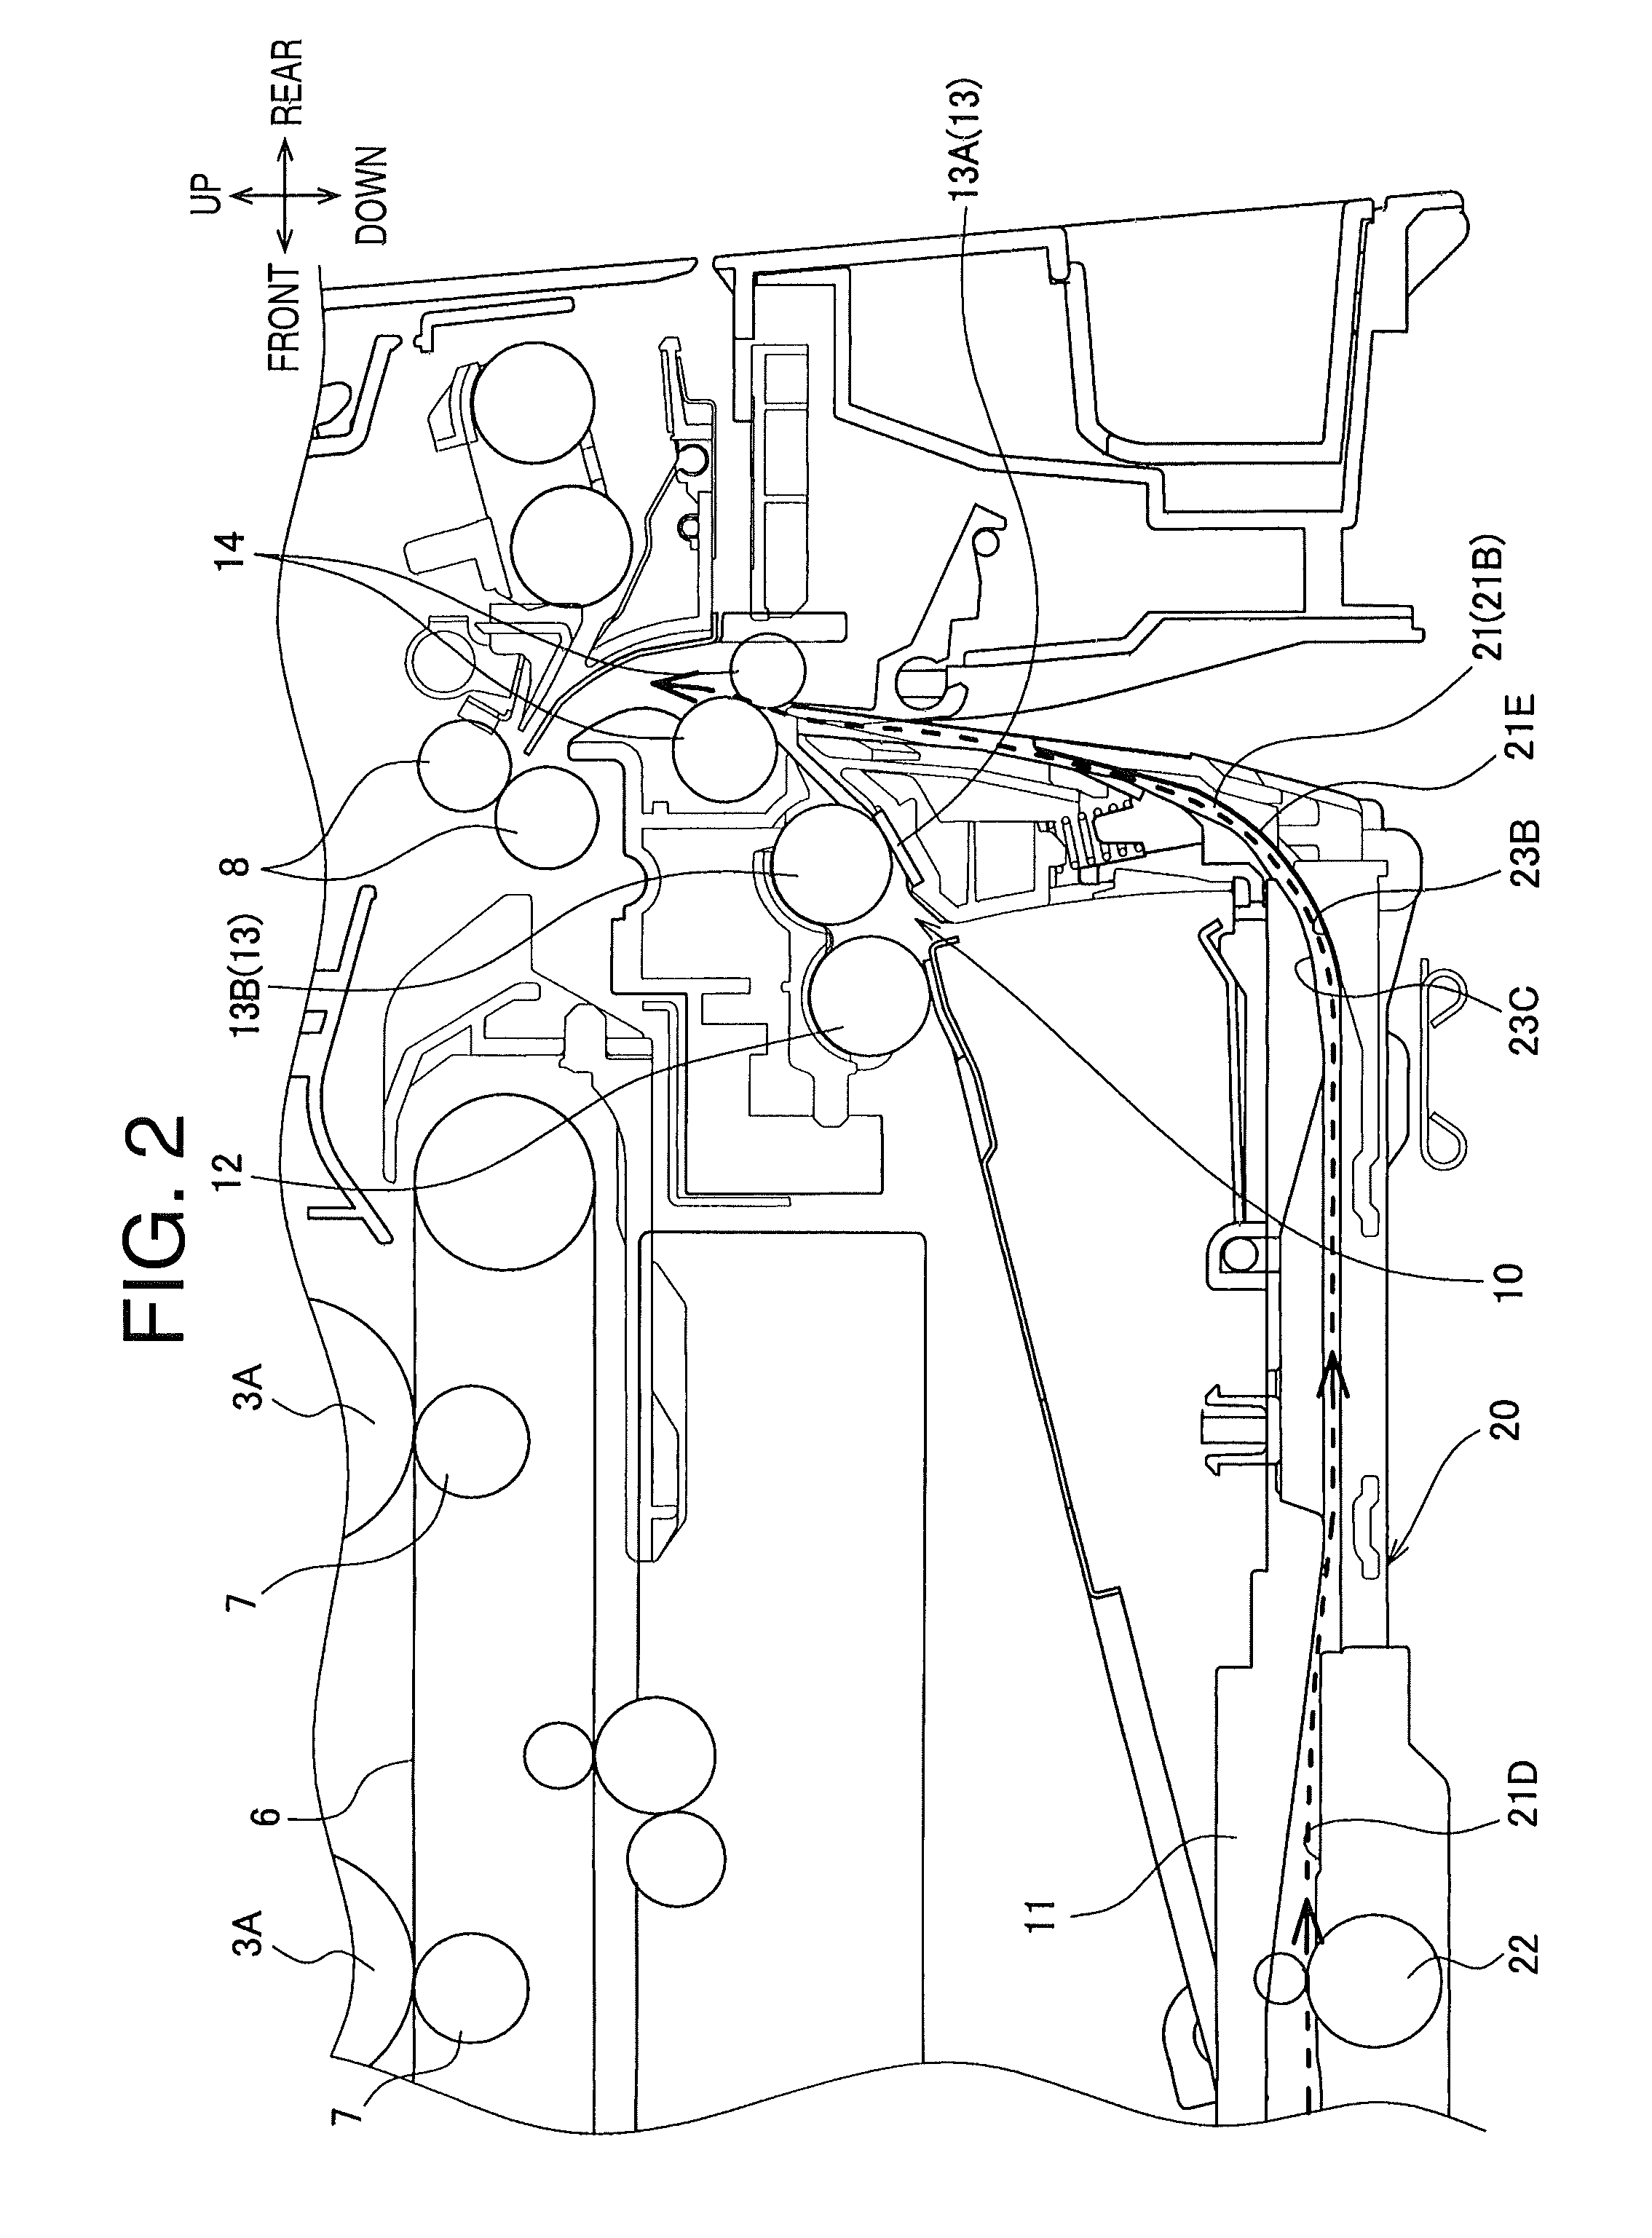 Sheet feeders and image forming apparatuses having the same